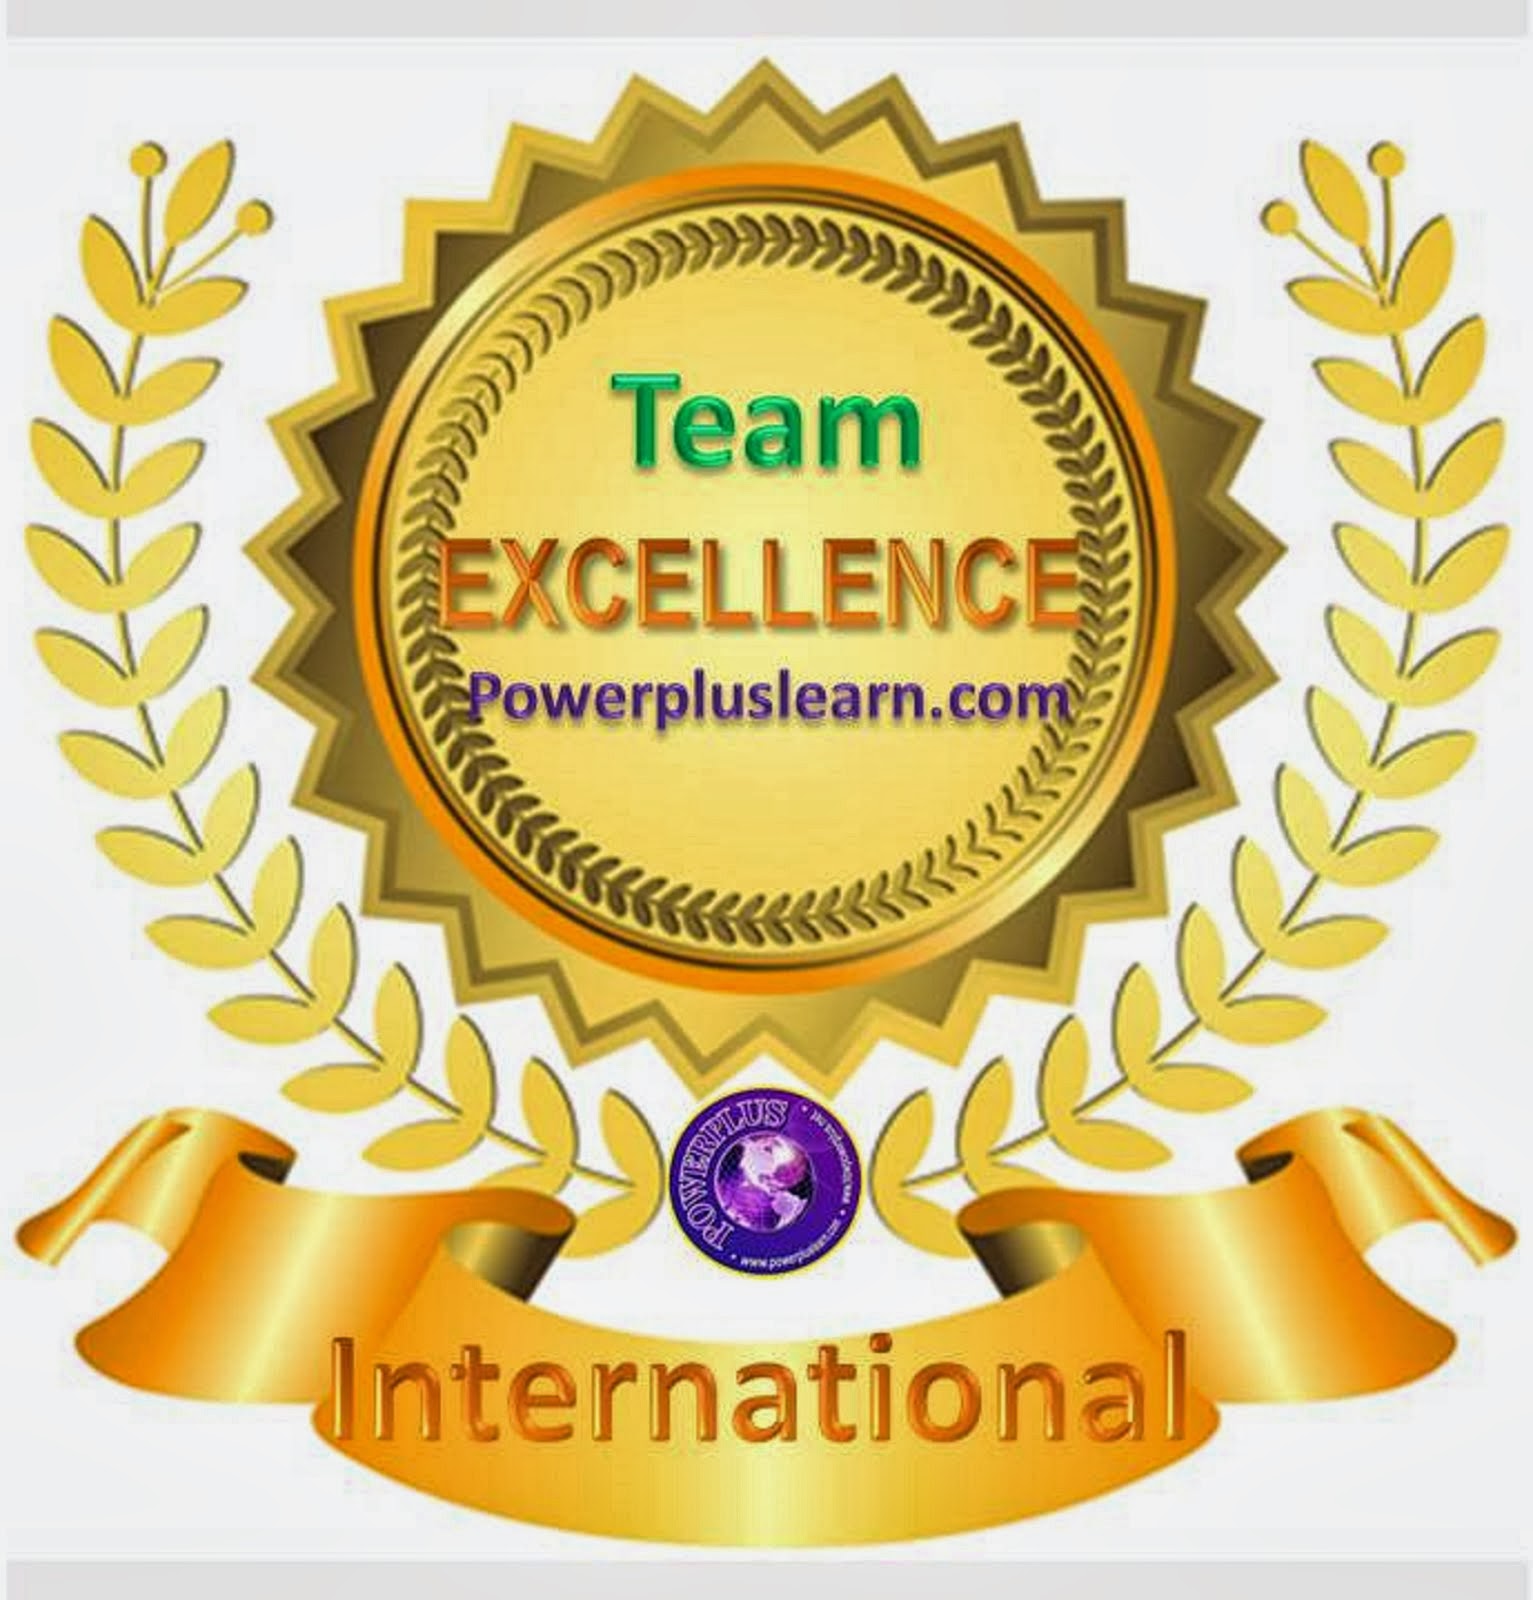 Team Excellence